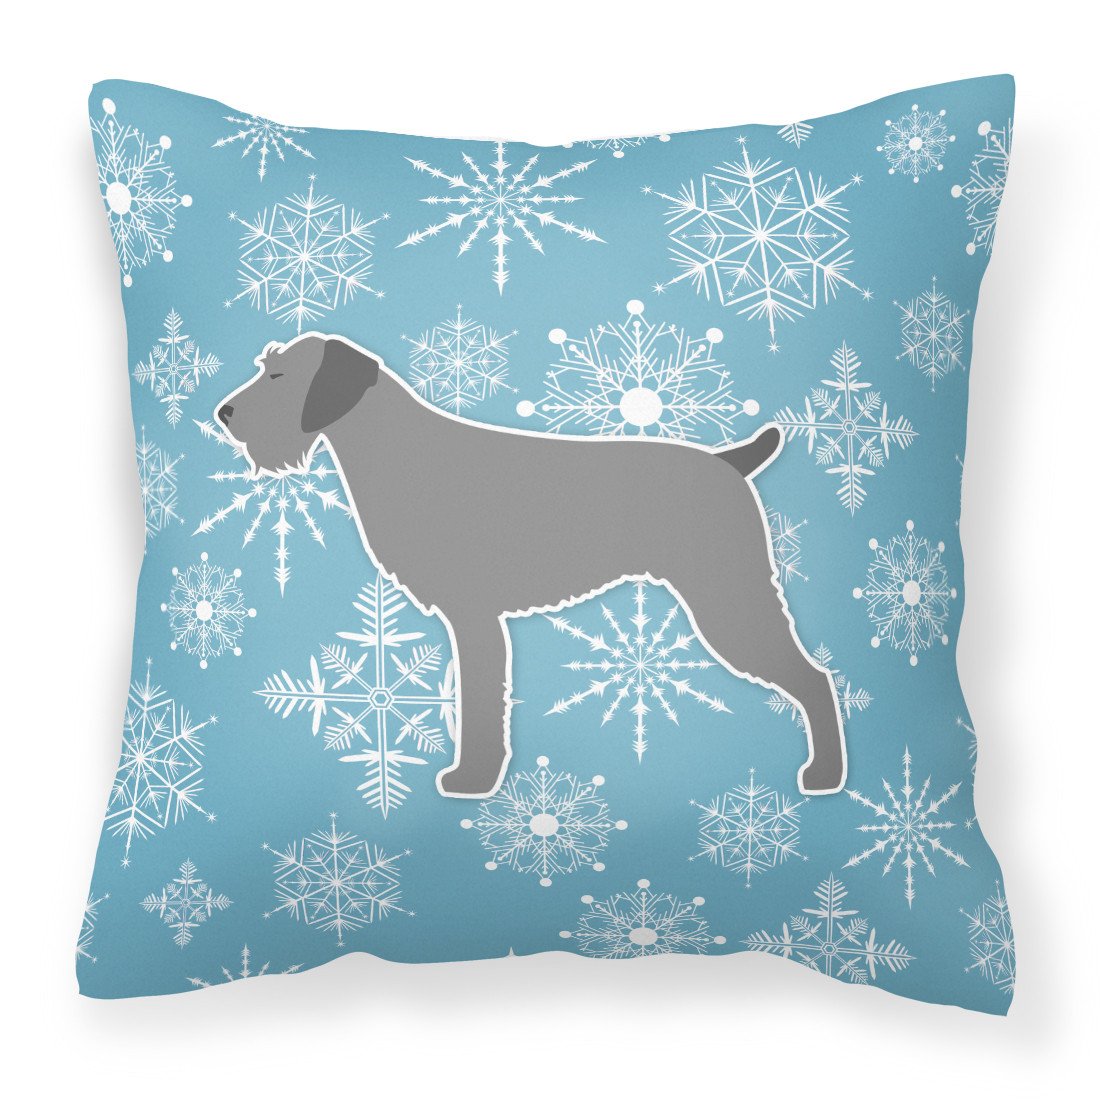 Winter Snowflake German Wirehaired Pointer Fabric Decorative Pillow BB3511PW1818 by Caroline's Treasures